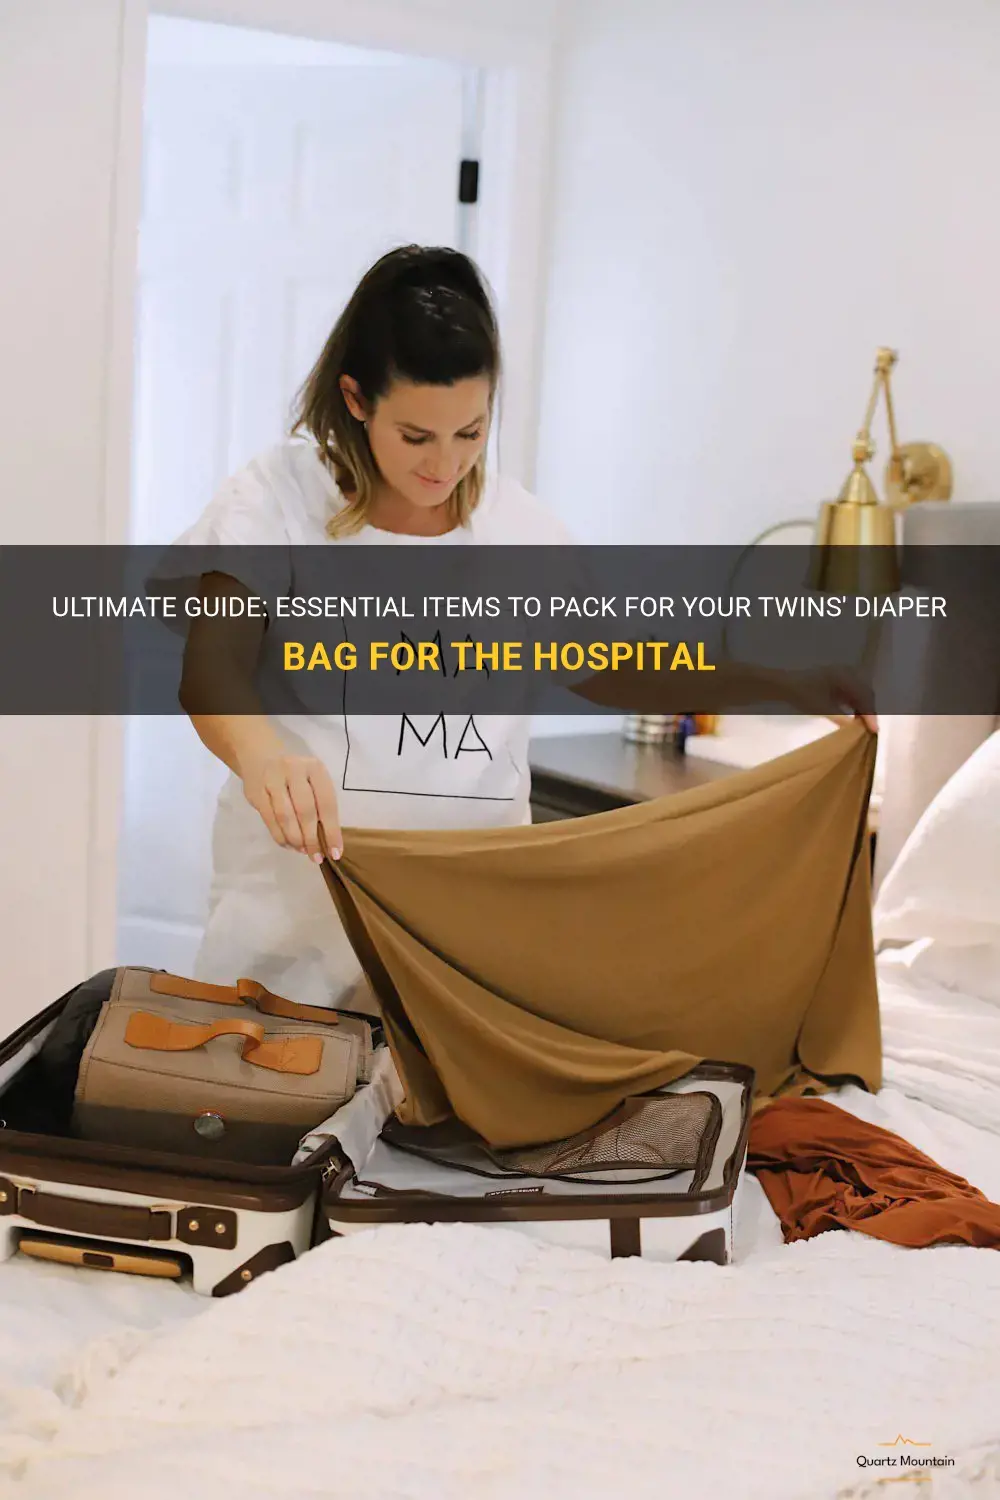 what to pack for twins diaper bag for hospital